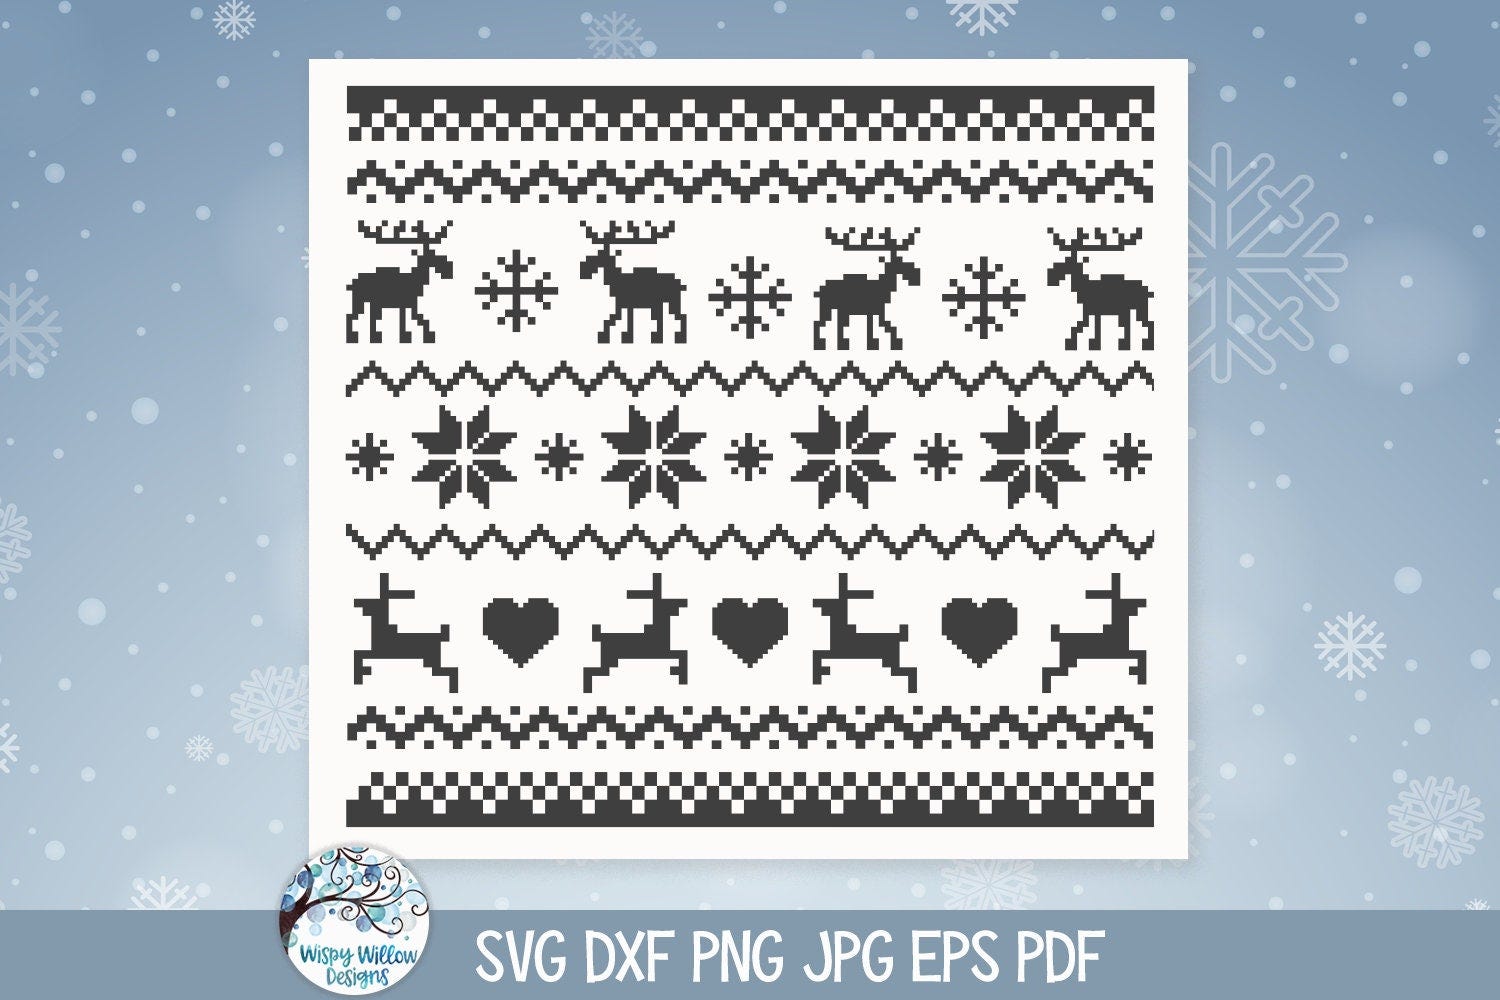 Ugly Sweater Pattern SVG for Cricut, Sweater Knit Pattern PNG, Christmas Shirt Design, Holiday Winter Sweater, Vinyl Decal Cut File Download